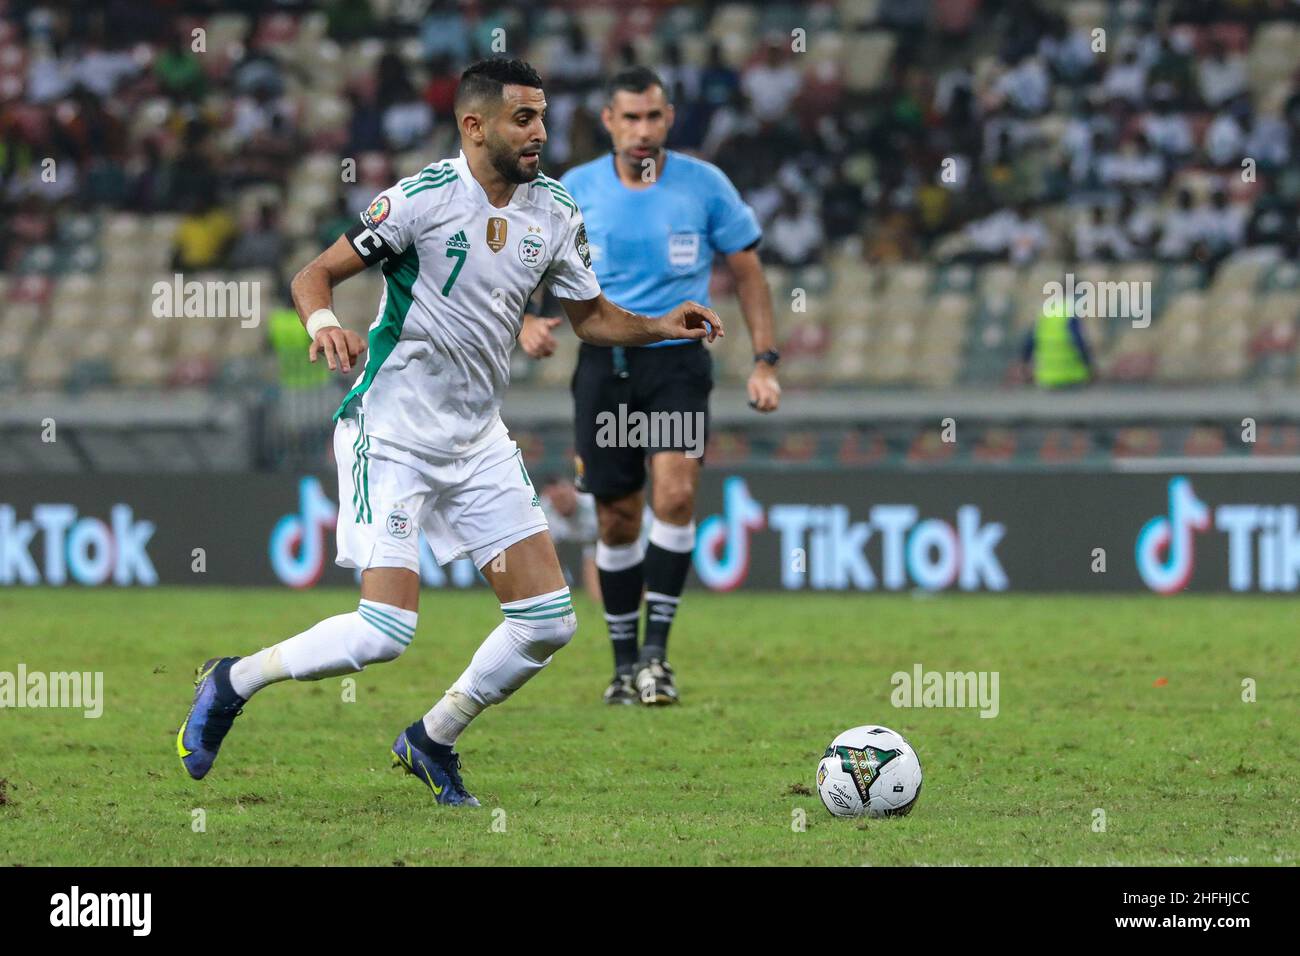 Douala, CAMEROON - JANUARY 16: Riyad Mahrez of Algeria on action during the Africa Cup of Nations group E match between Algeria and Equatorial Guinea at Stade de Japoma on January 16 2022 in Douala, Cameroon. (Photo by SF) Credit: Sebo47/Alamy Live News Stock Photo